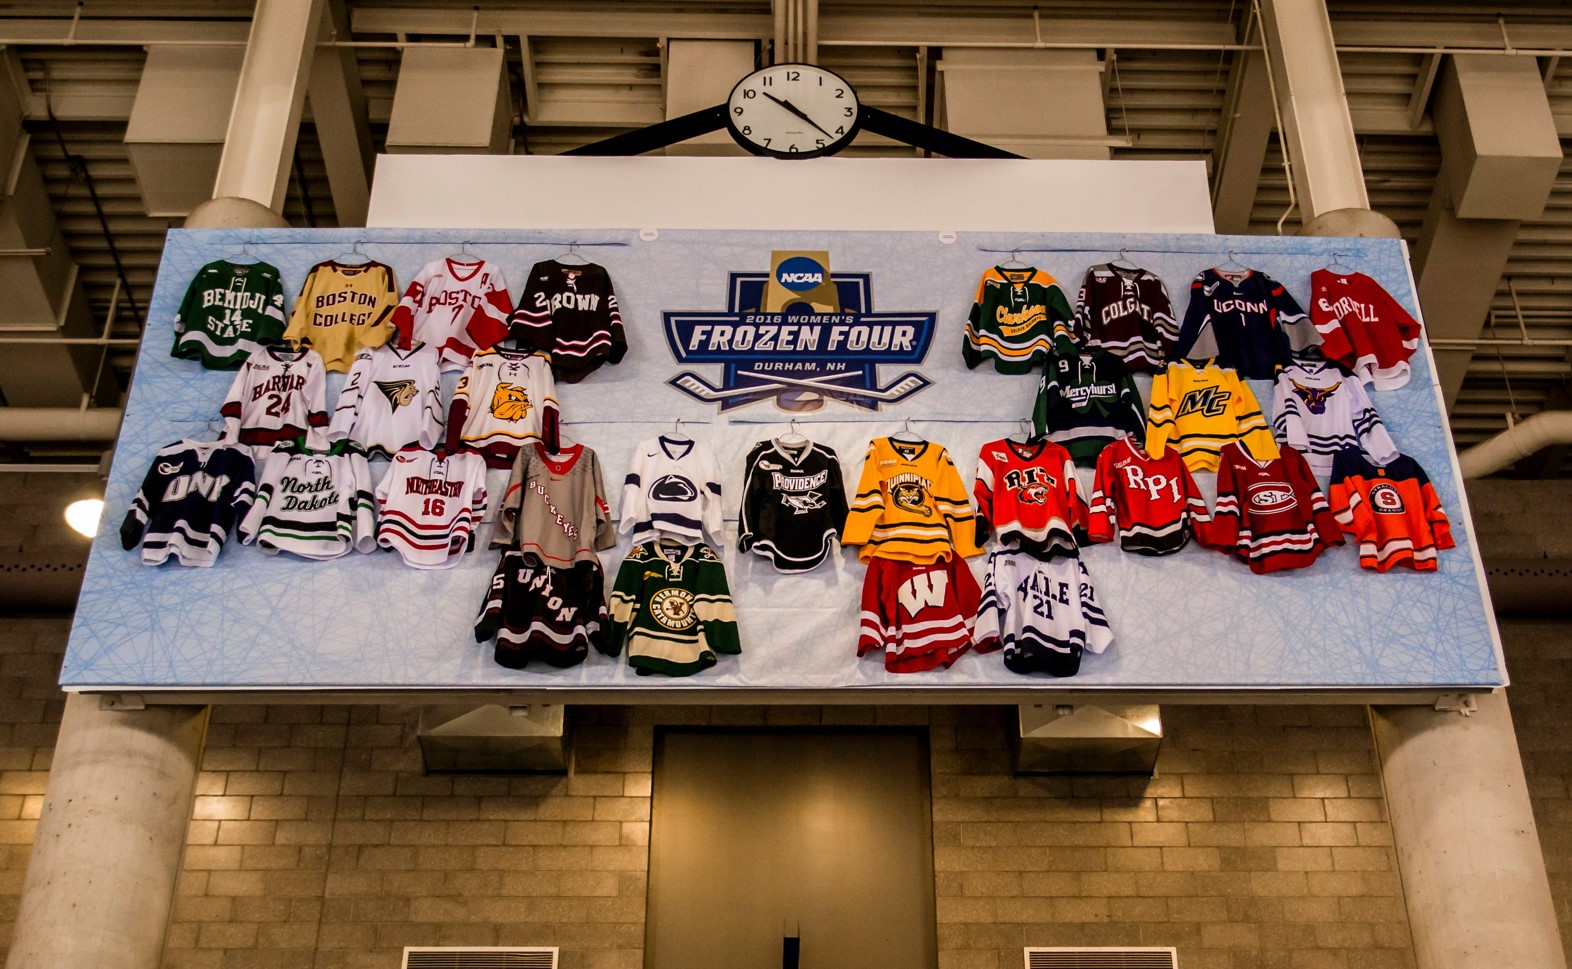 Frozen Four Video Board Cover Up